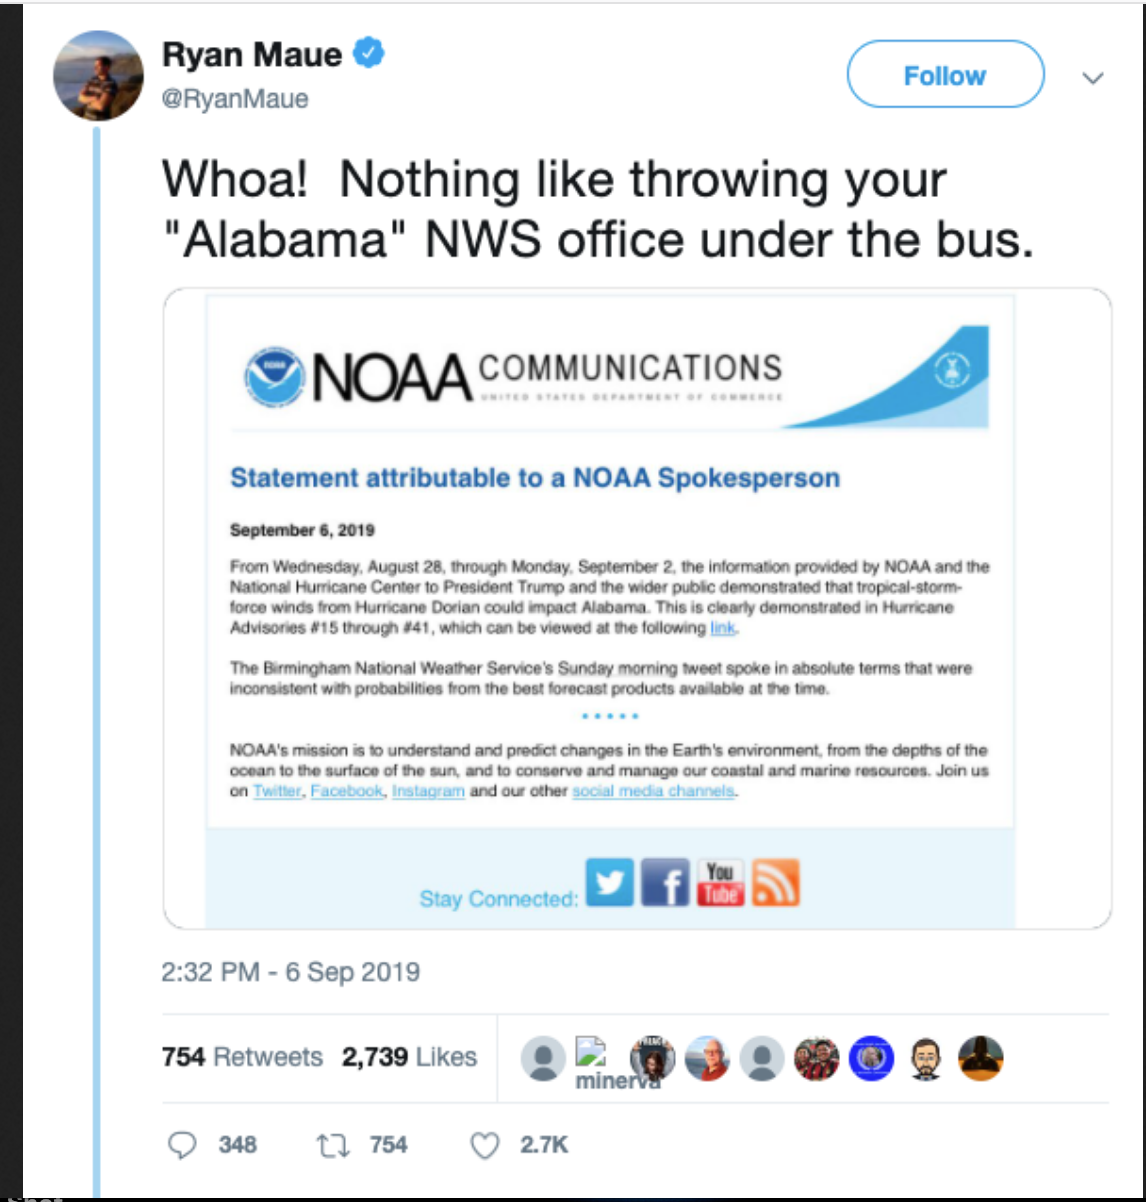 Screen shot of Ryan Maue's tweets criticizing the White House and NOAA over Trump's SharpieGate incident